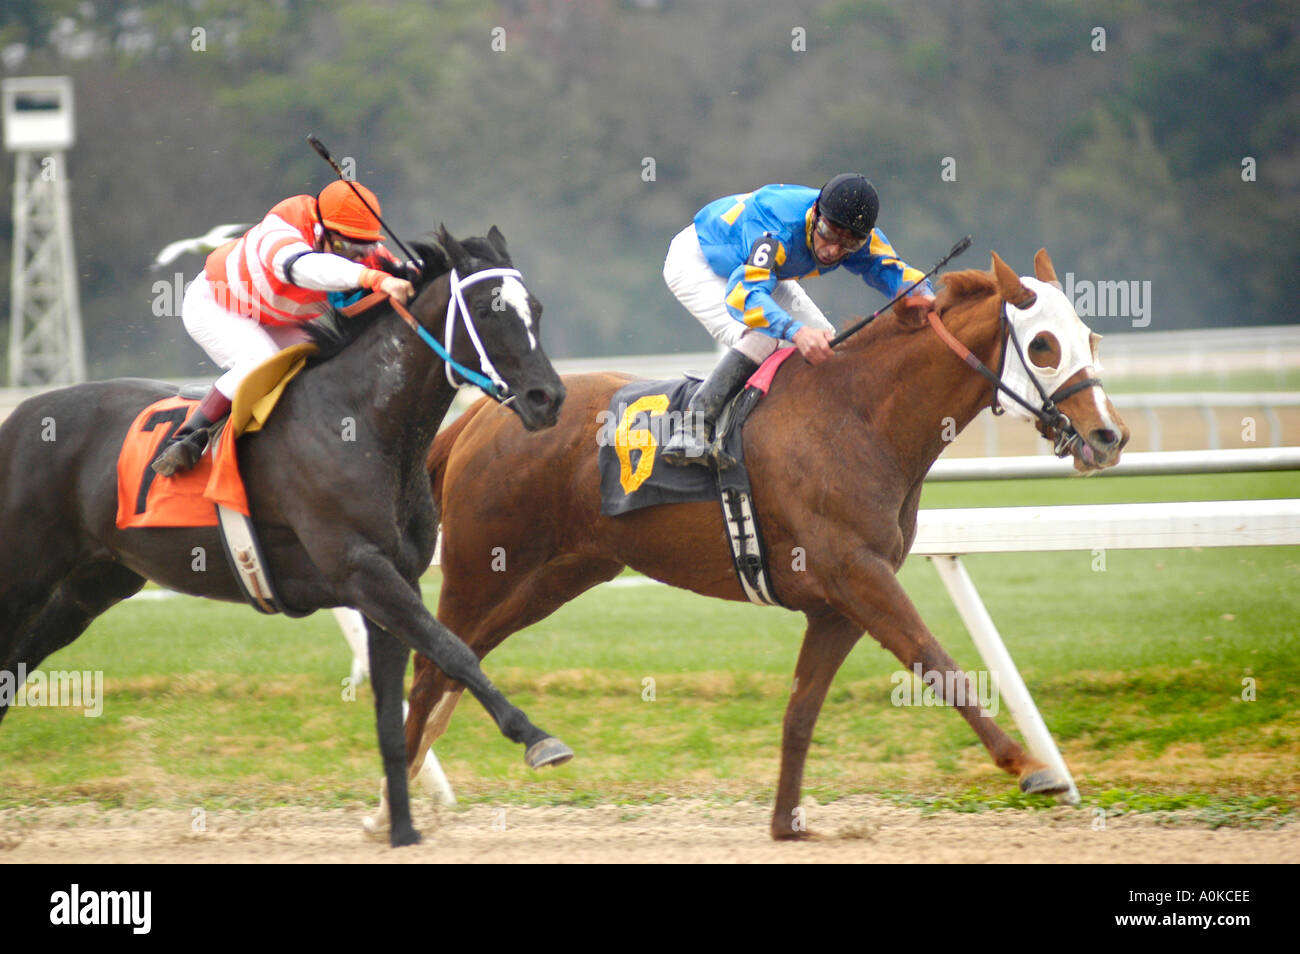 Thoroughbred Horse Race Tampa Bay Downs Florida Stock Photo